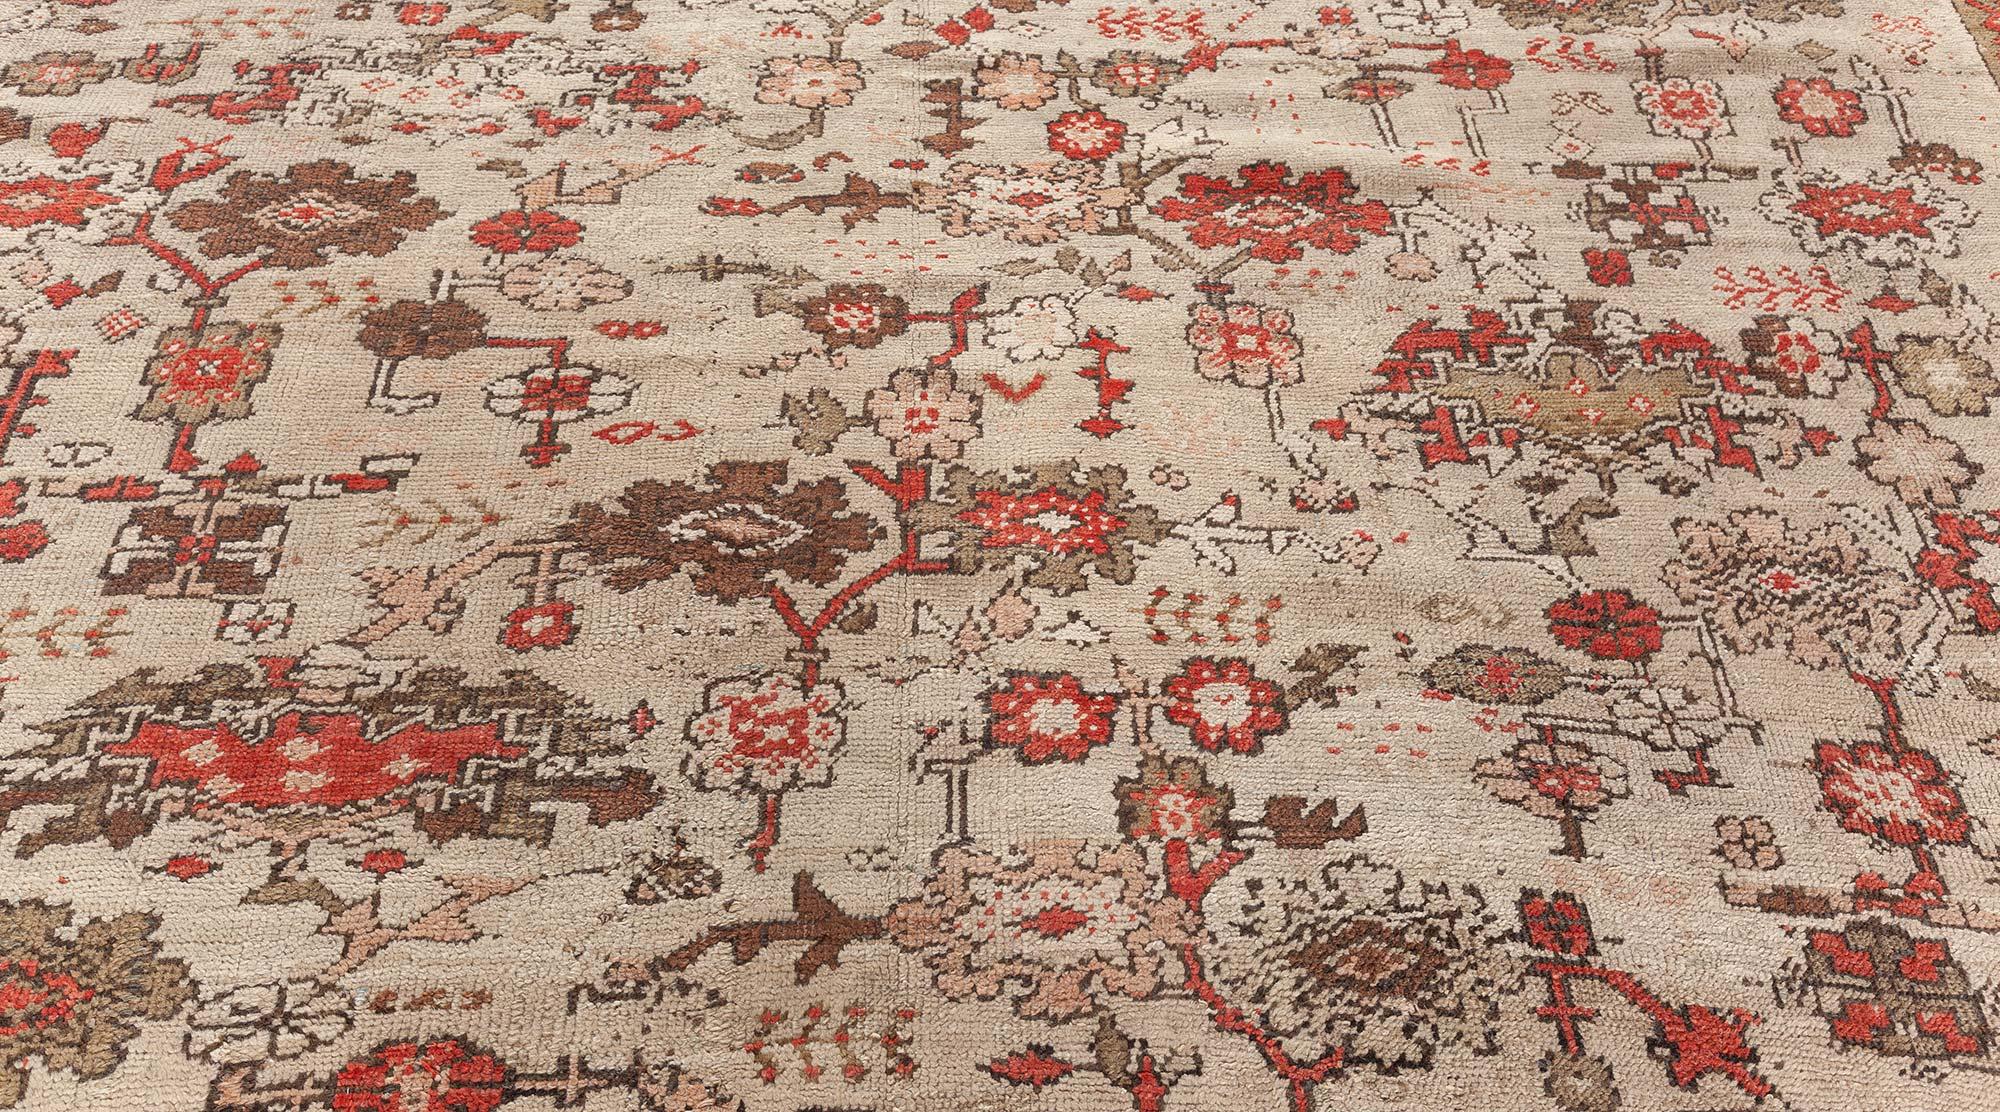 Early 20th Century Turkish Ghiordes Rug
Size: 10'3